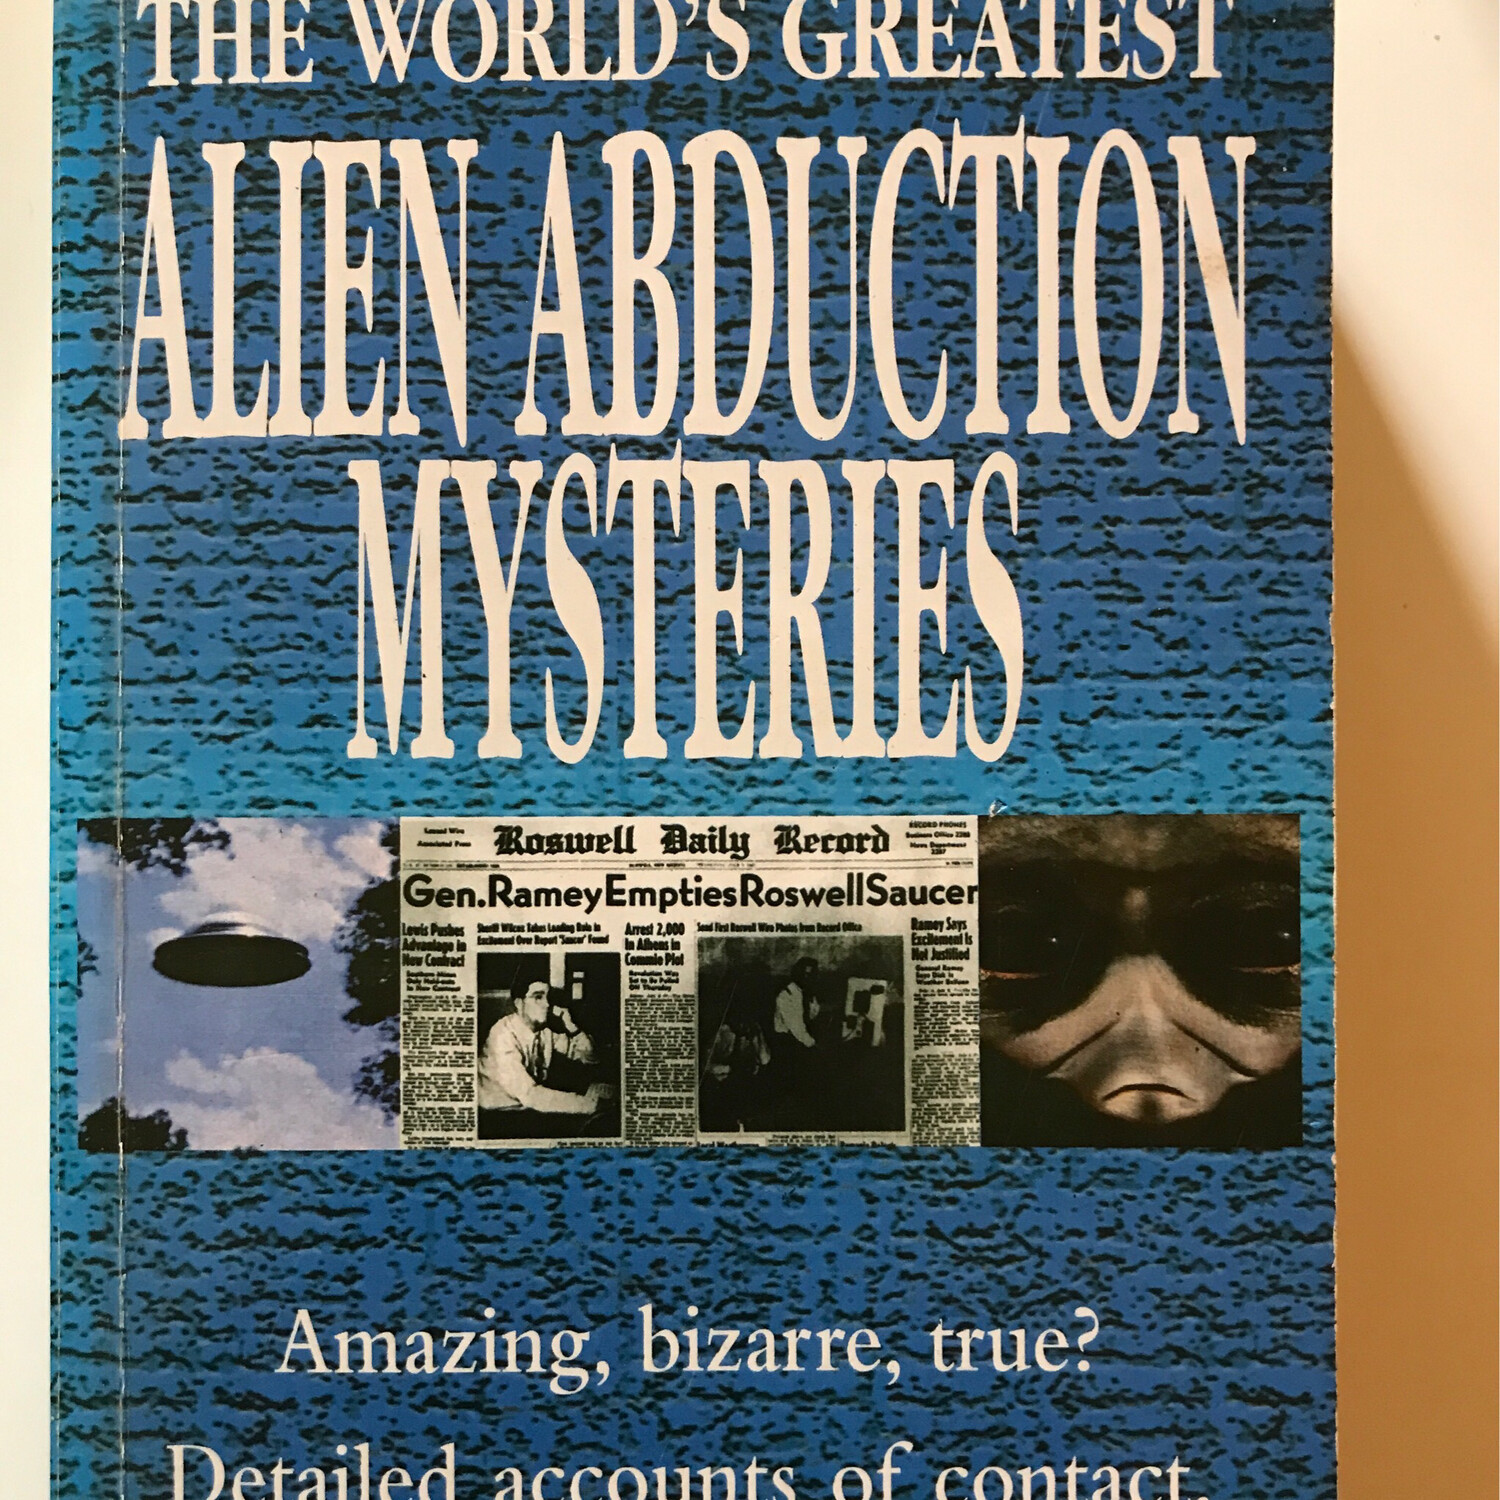 Alien Abduction Mysteries, The World’s Greatest